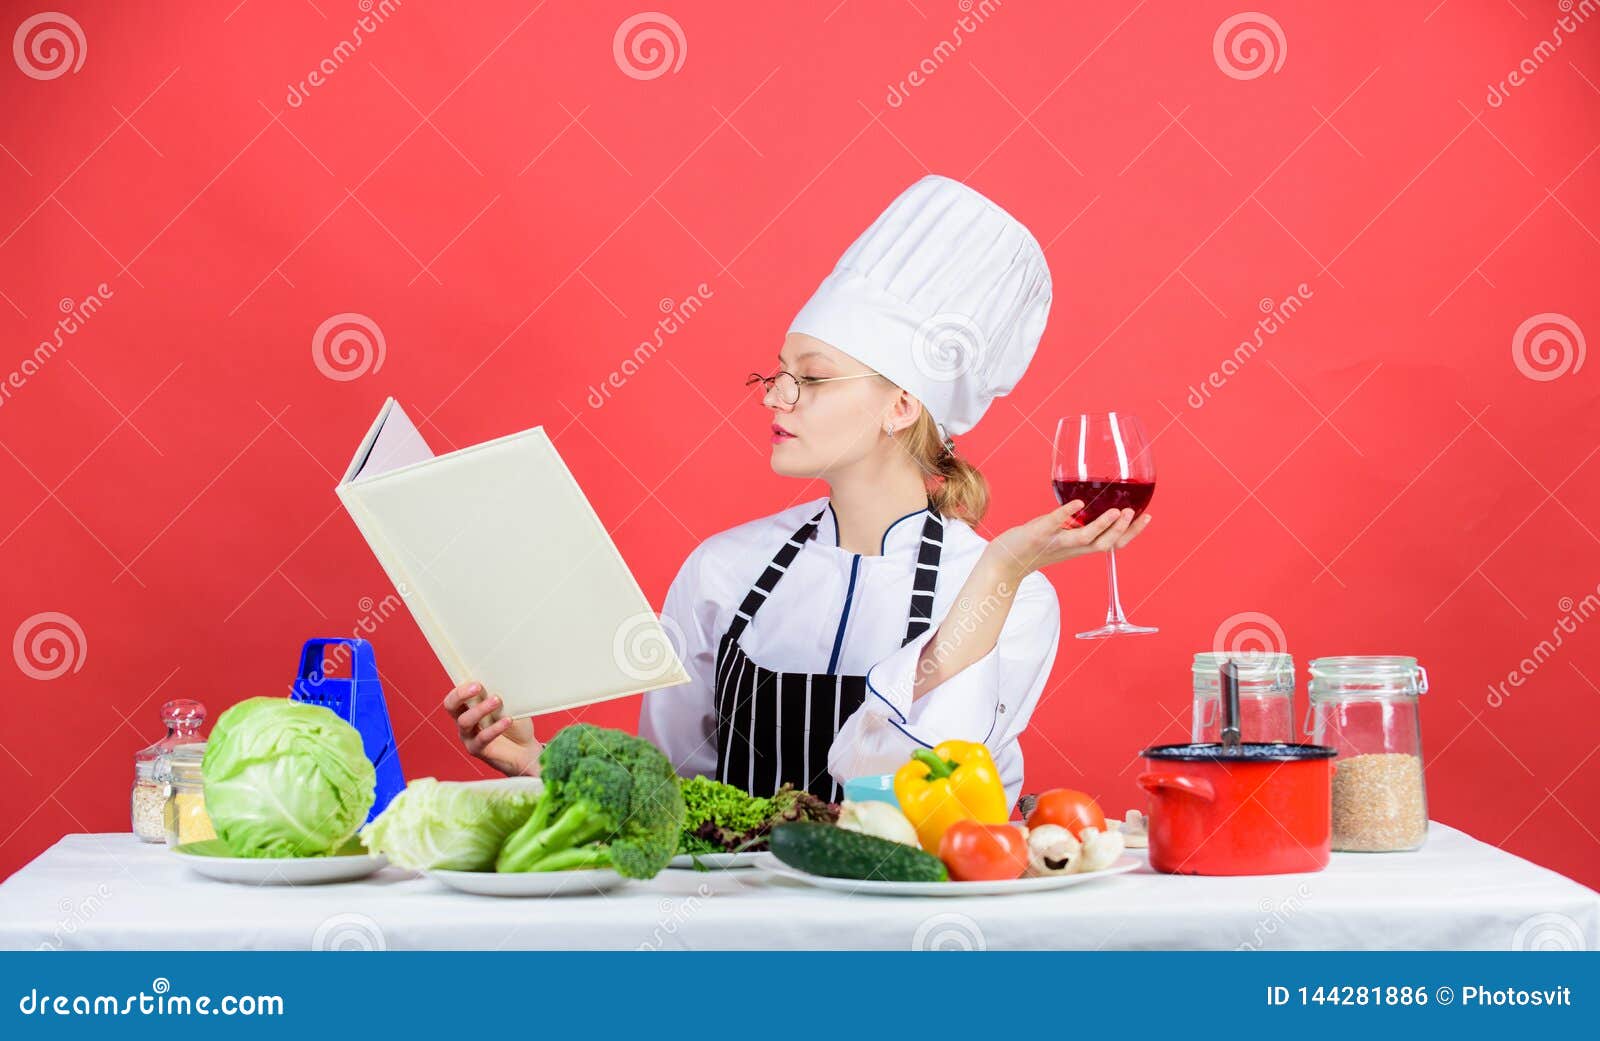 Finding Recipe for Every Occasion. Lady Cook Looking for Cooking Recipe ...